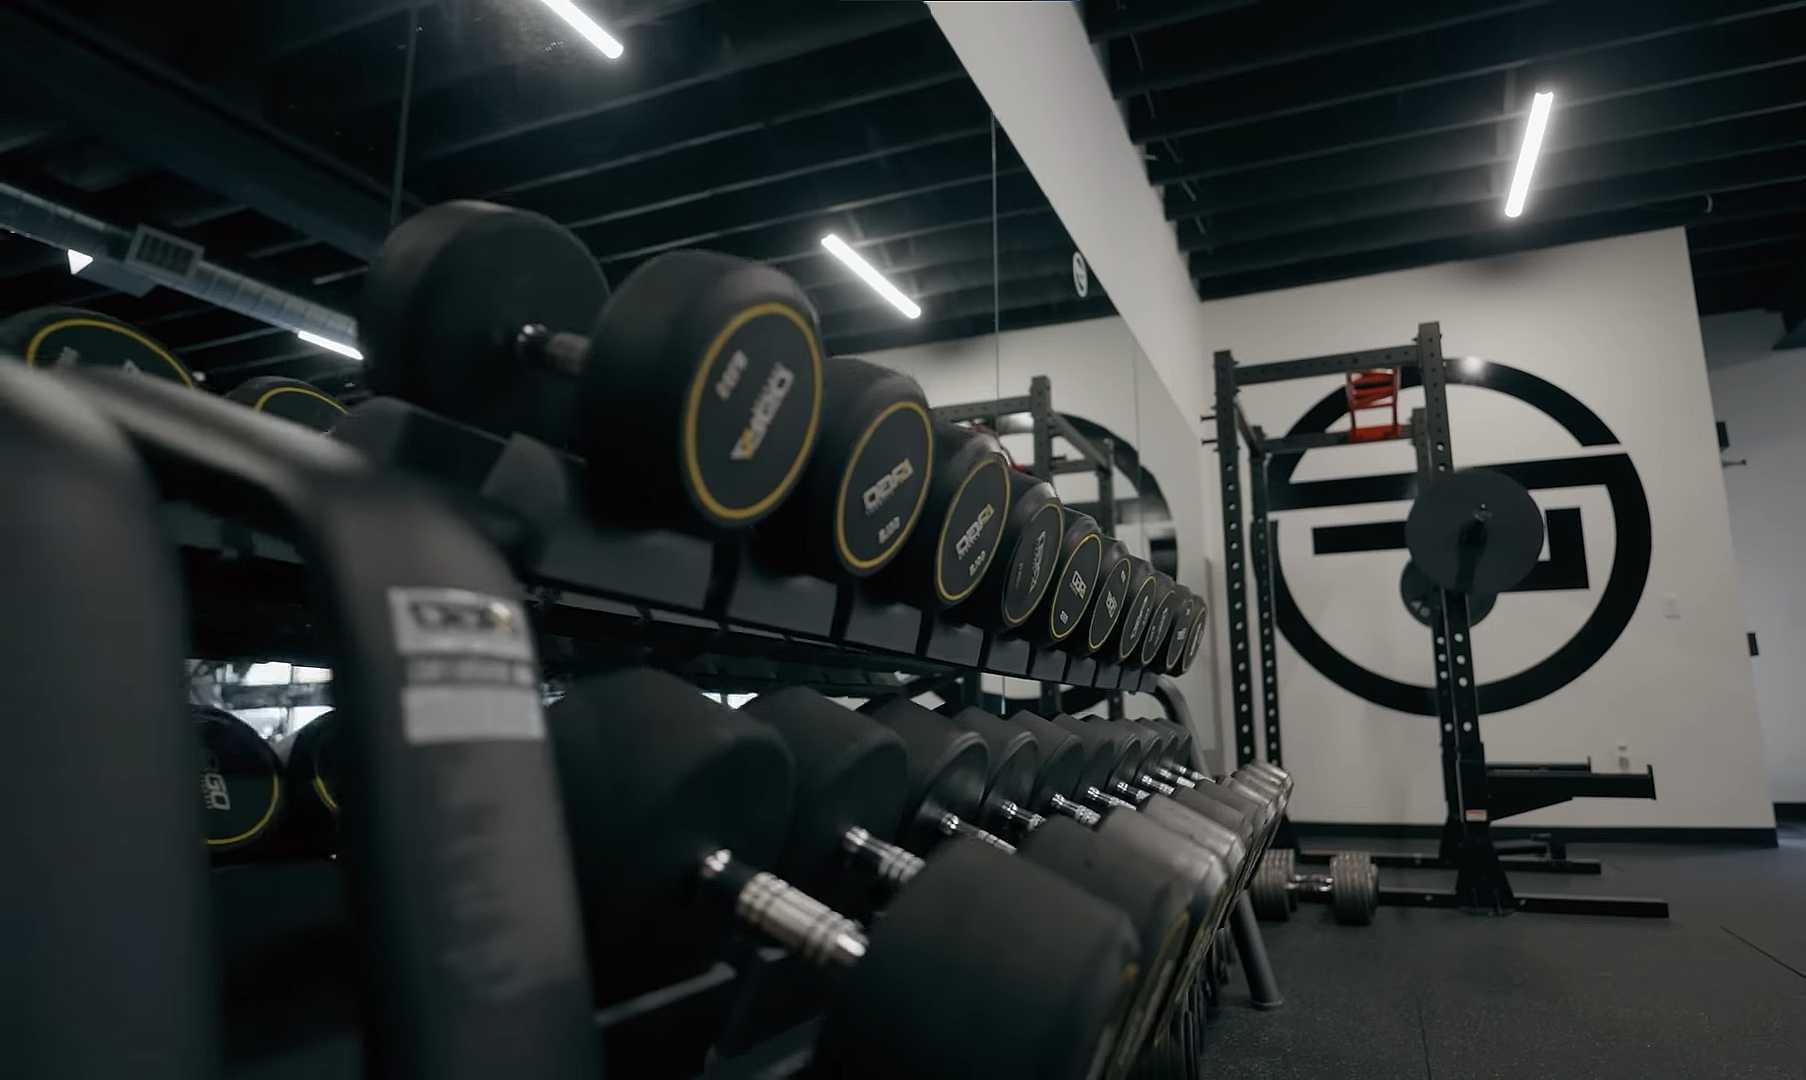 A wide shot of the DeMelo Fitness hand weight rack. In the background is the DeMelo Fitness logo on the wall with a crossbar out of focus